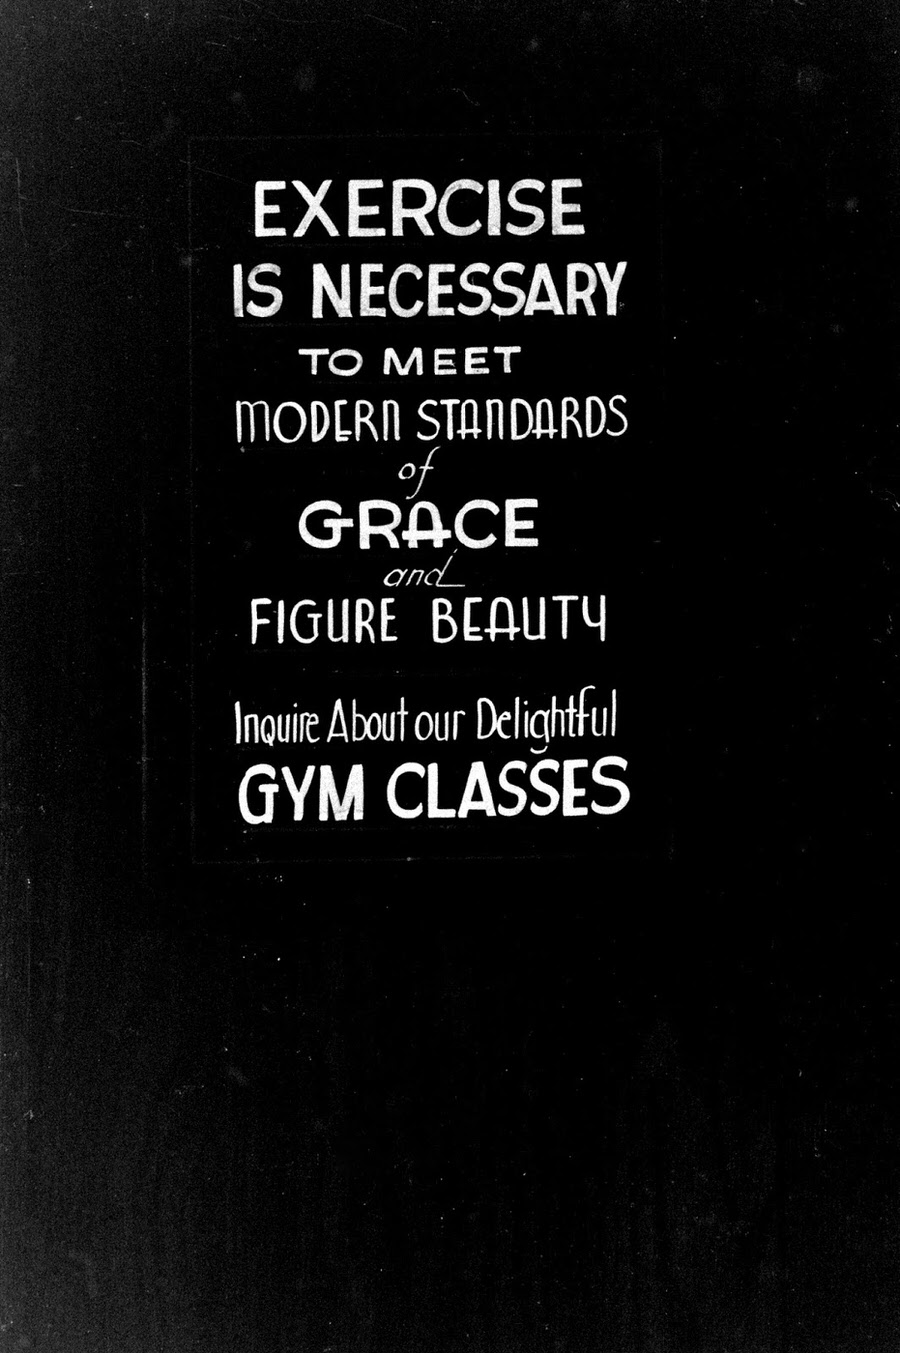 Advertisement for gym classes at Rose Dor Farms.